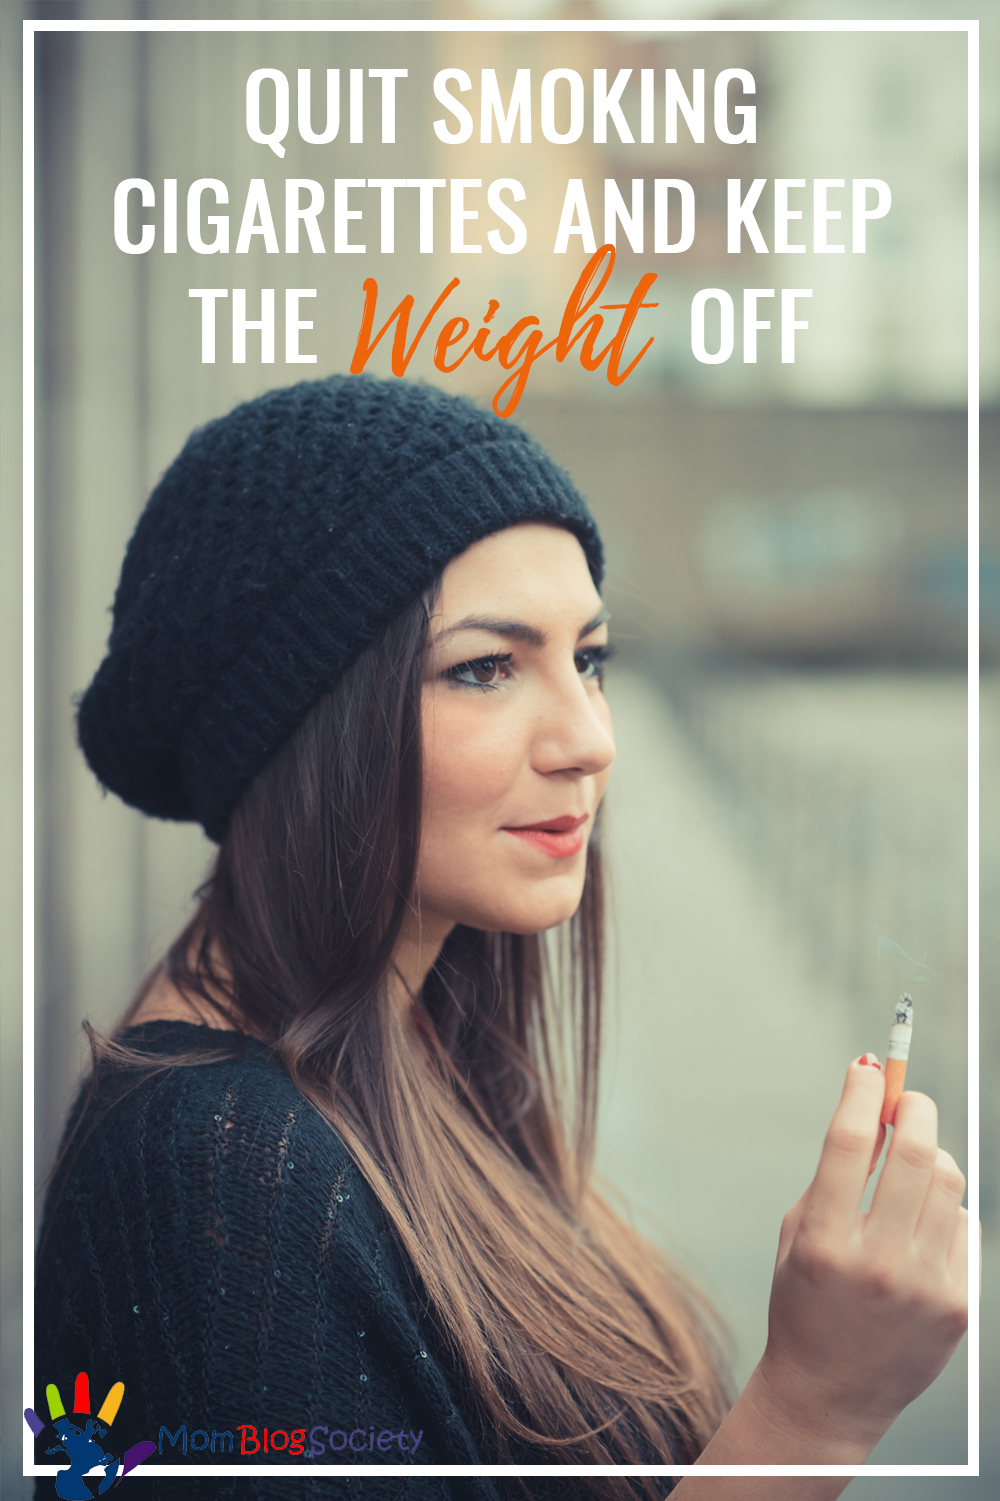 Quit Smoking Cigarettes and Keep the Weight Off